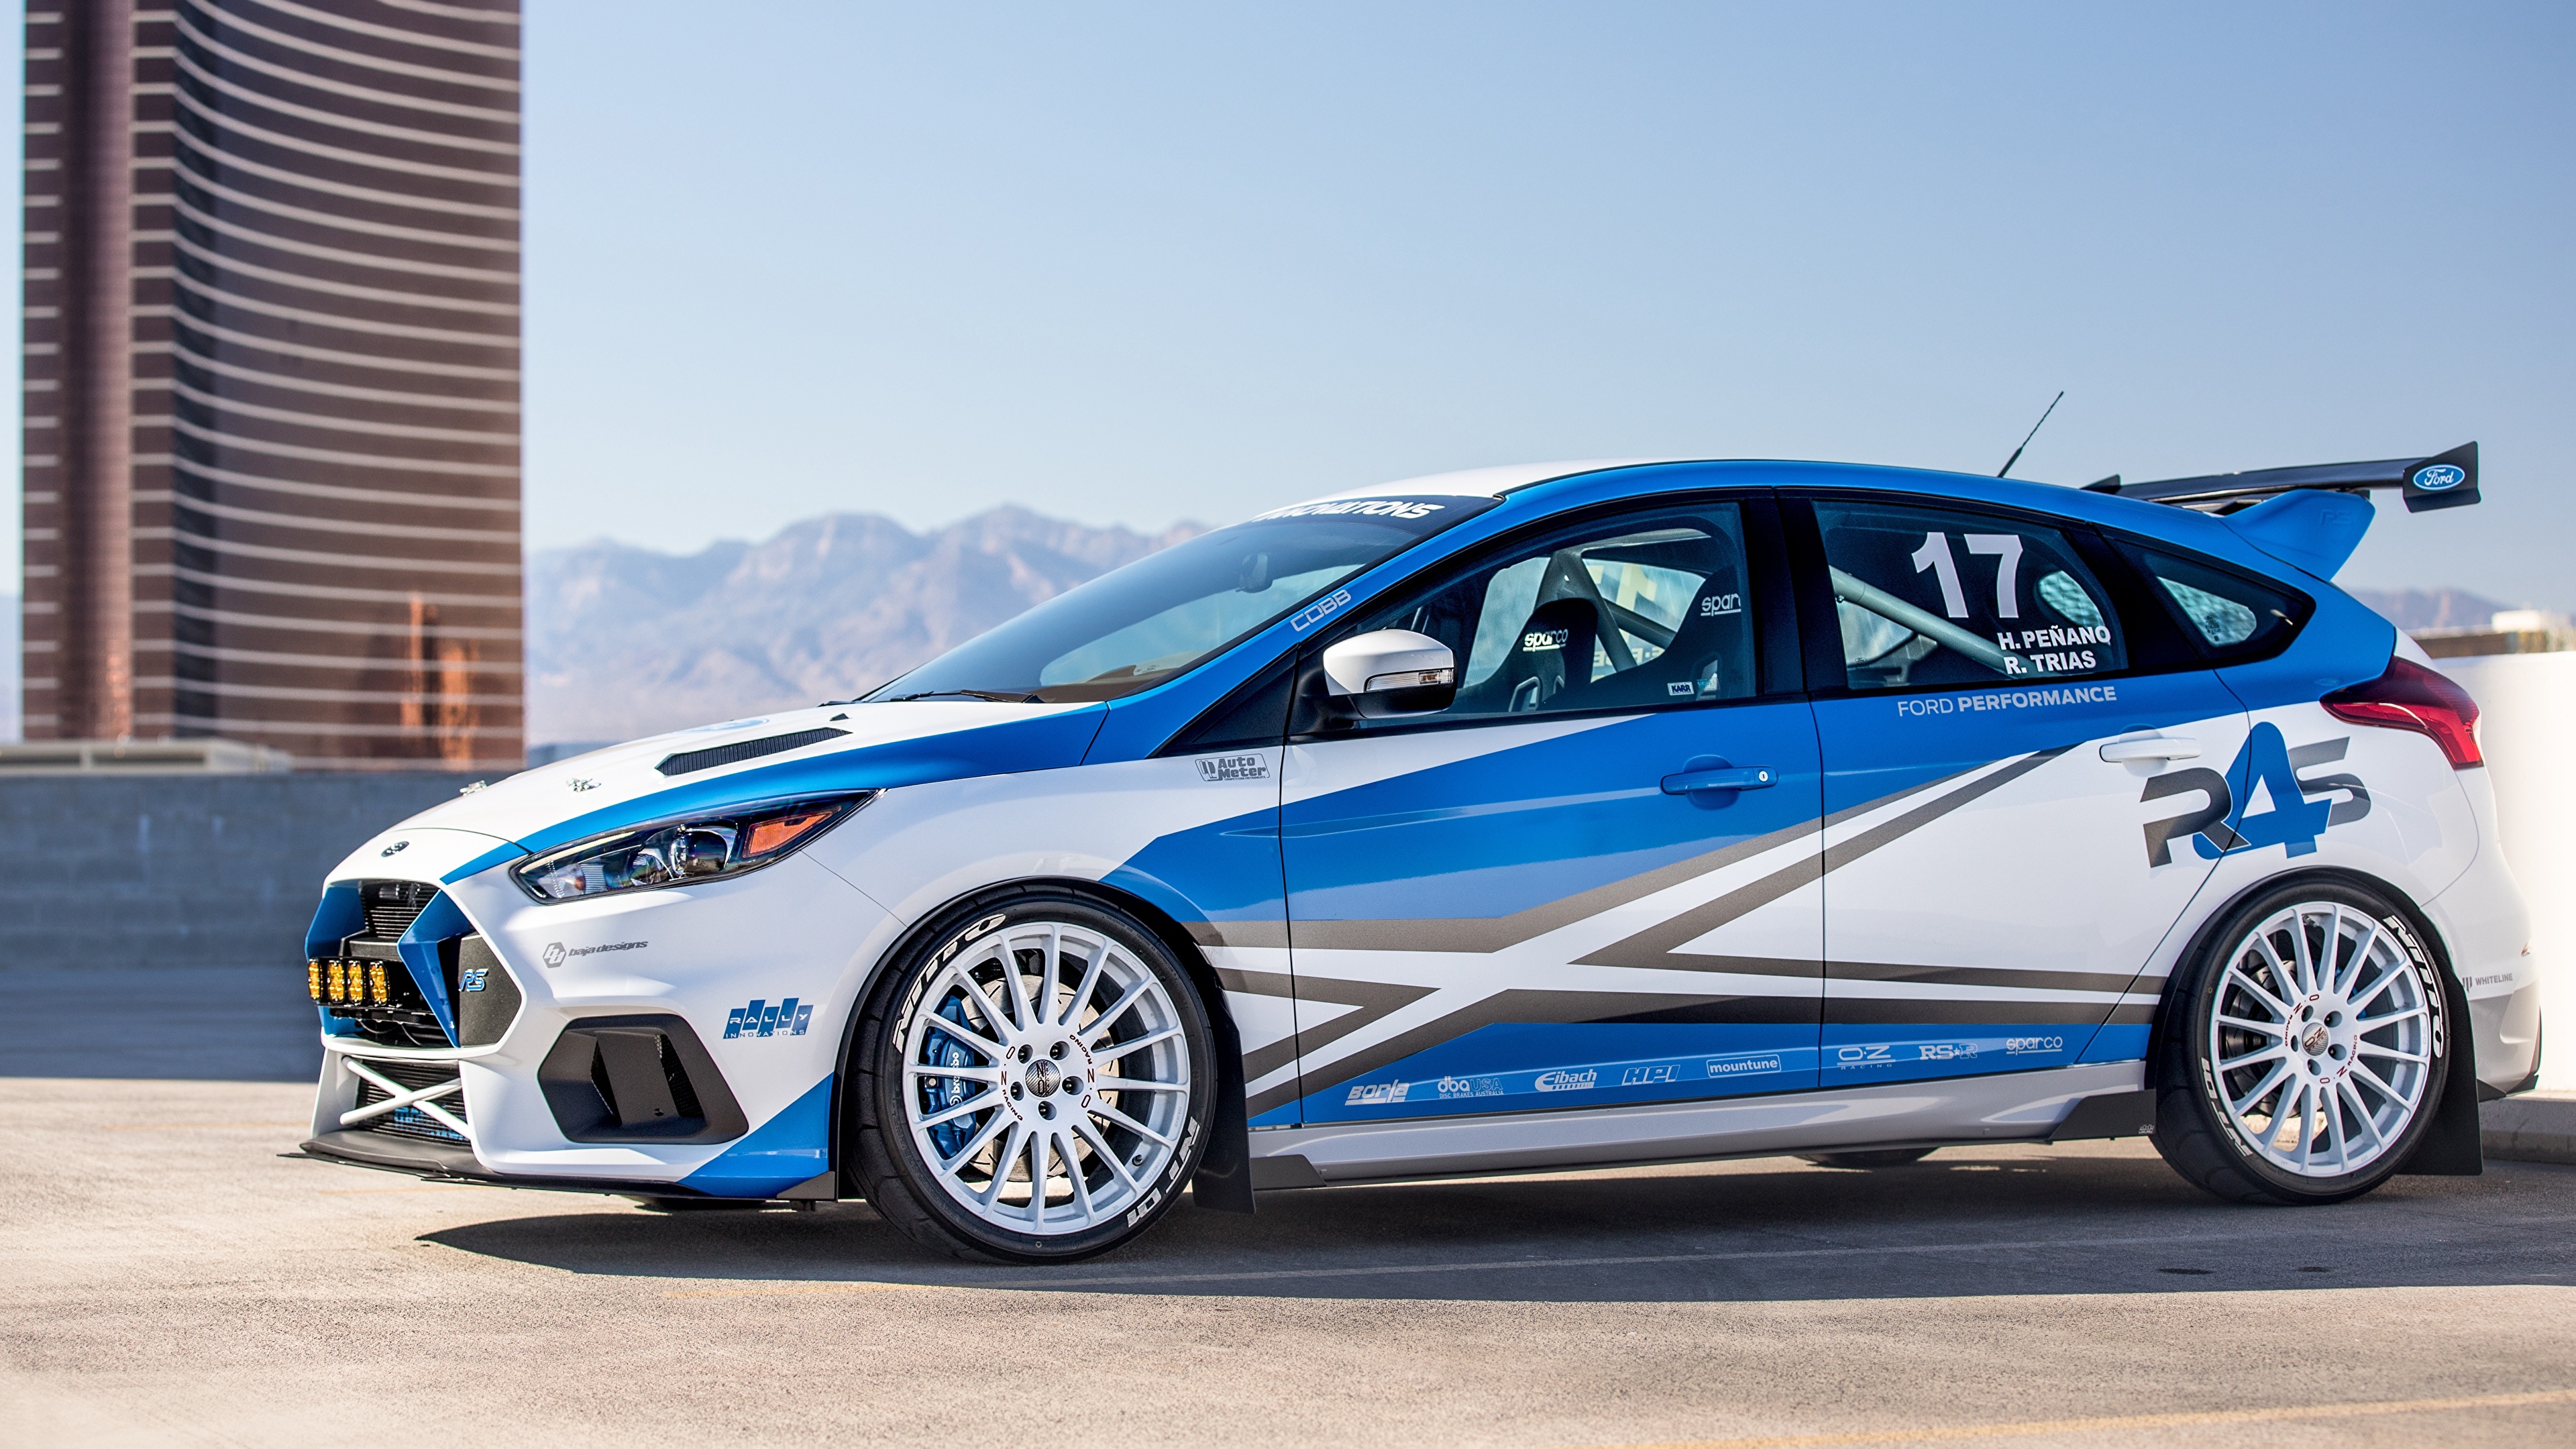 This MK1 Ford Focus RS Render Is Our Mid-Engined Gift To Hoonigan's Ken  Block